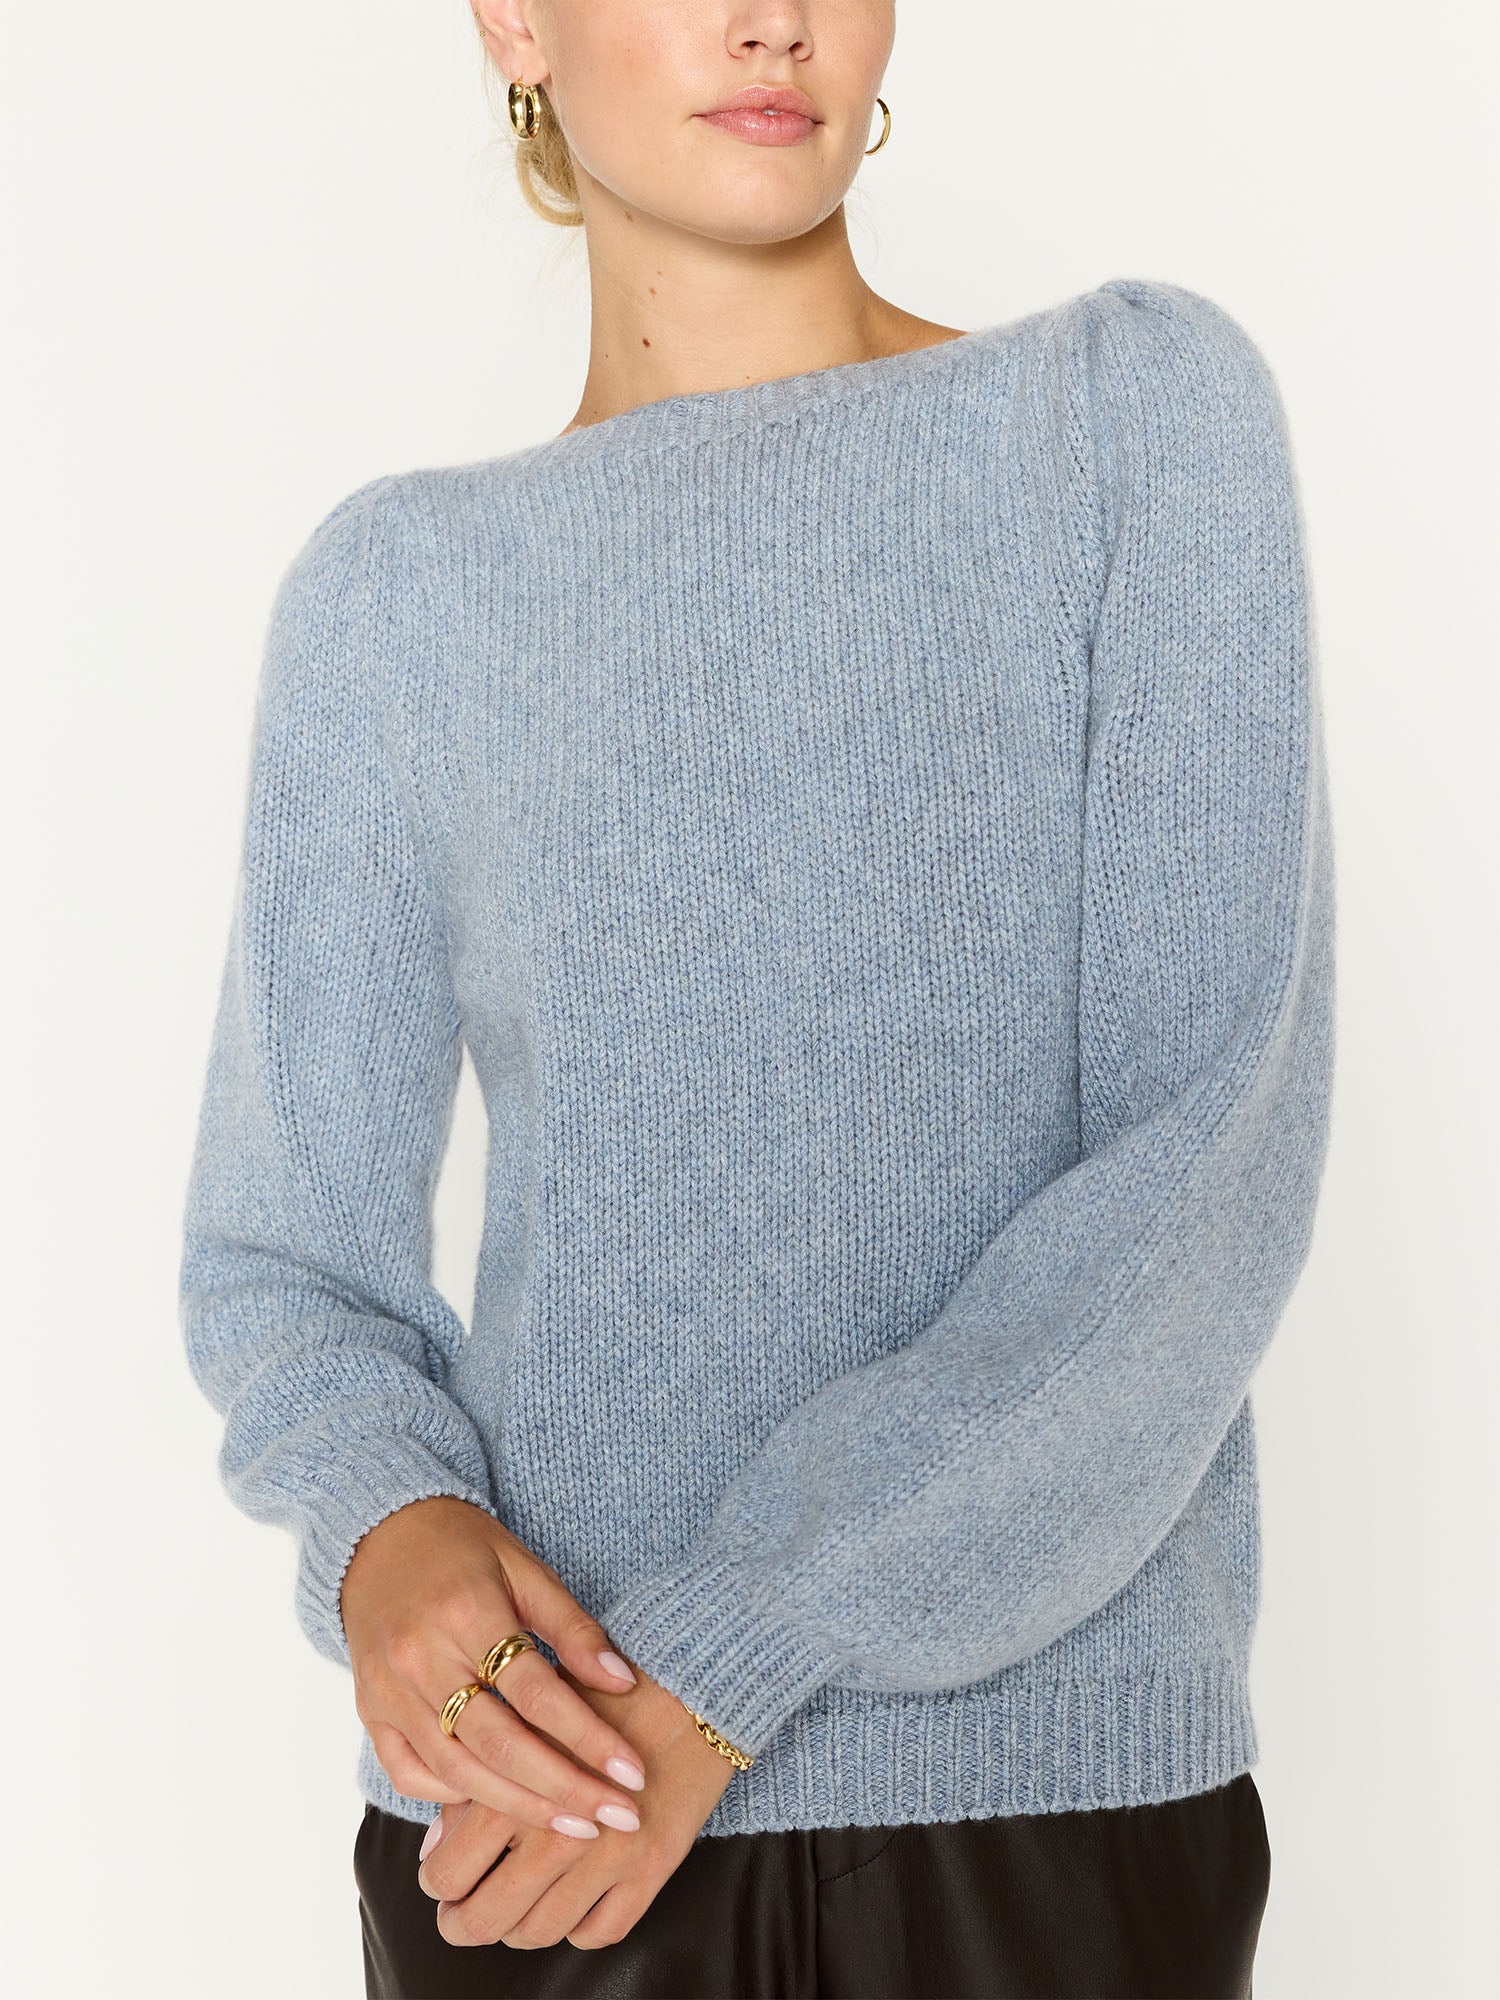 Delphi cashmere boatneck blue sweater front view